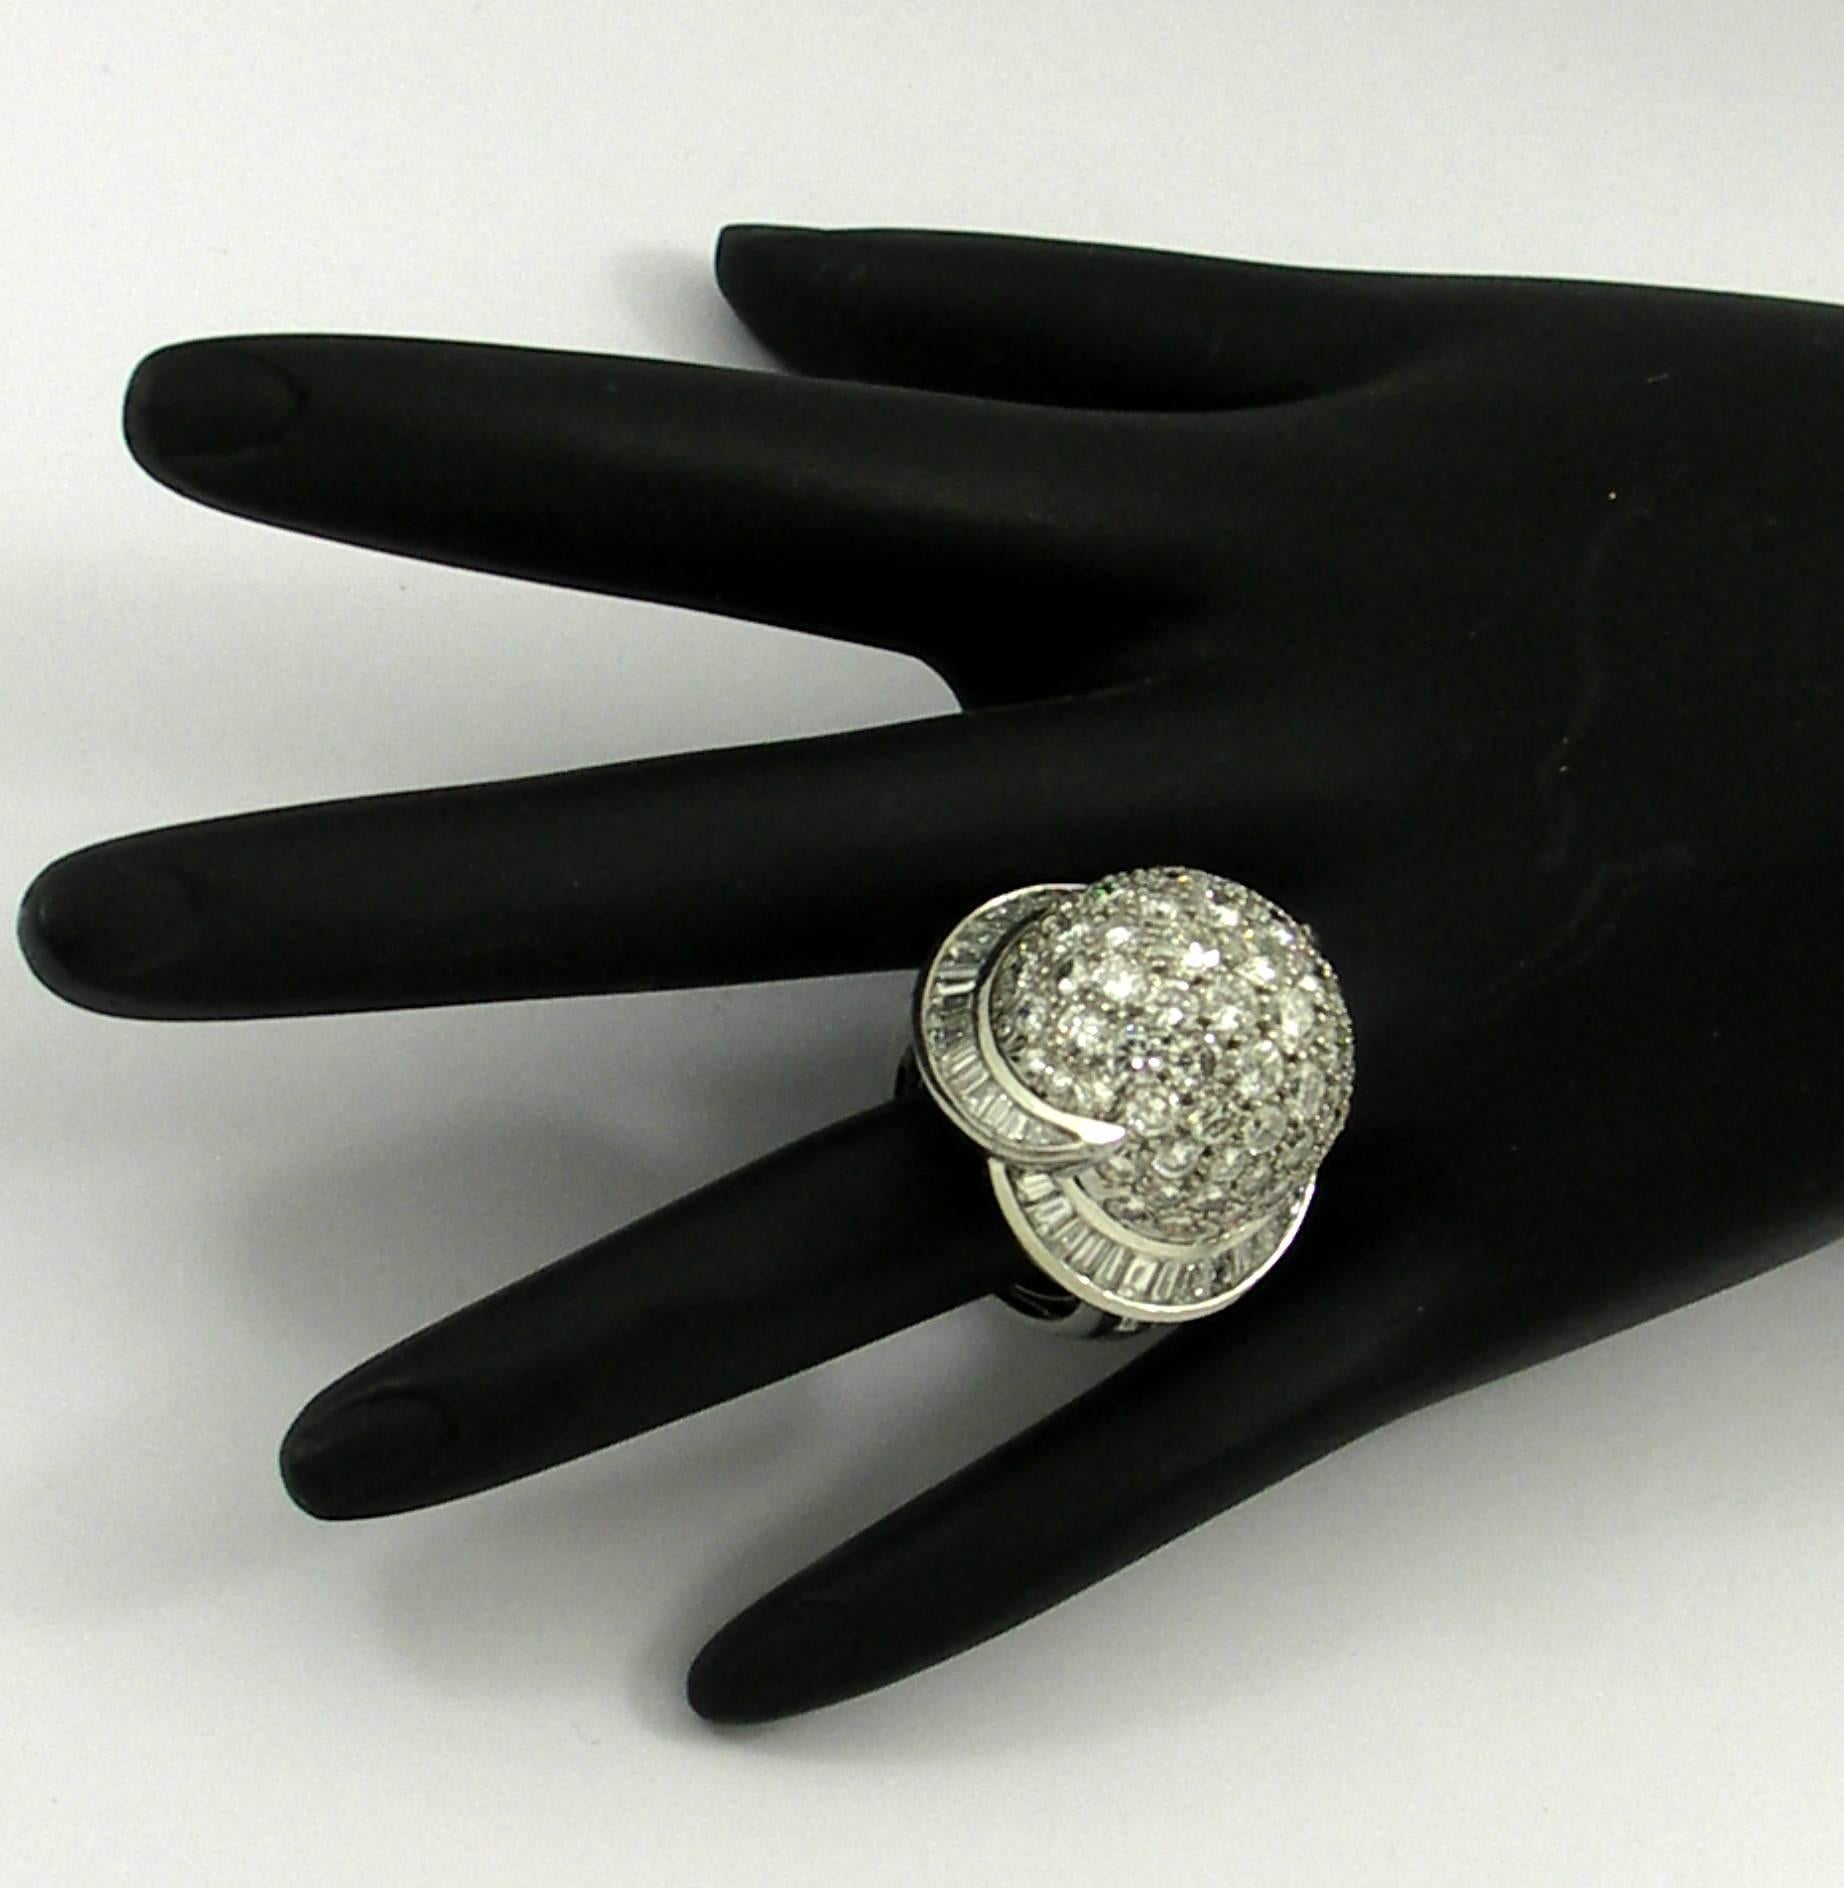 A modern design ring incorporating upswept bands of baguette cut diamonds around a pave' diamond dome. This platinum cocktail ring also features baguette and round cut diamonds on the shoulders for a total approximate weight of 9ct. Diamonds are of